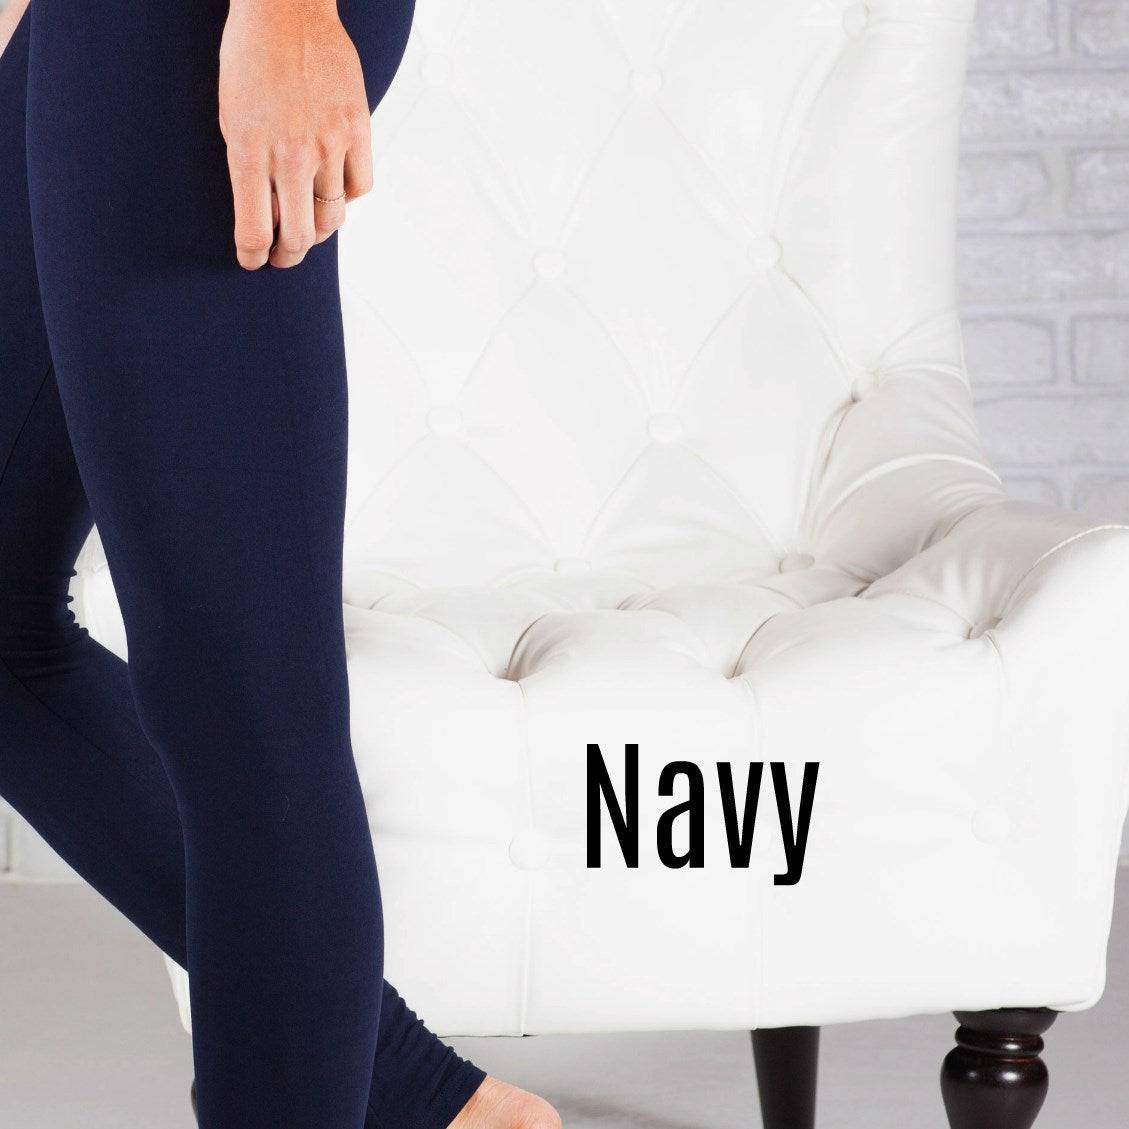 Fleece Lined Leggings (Navy Teal) - New Dimensions Active - New Drops